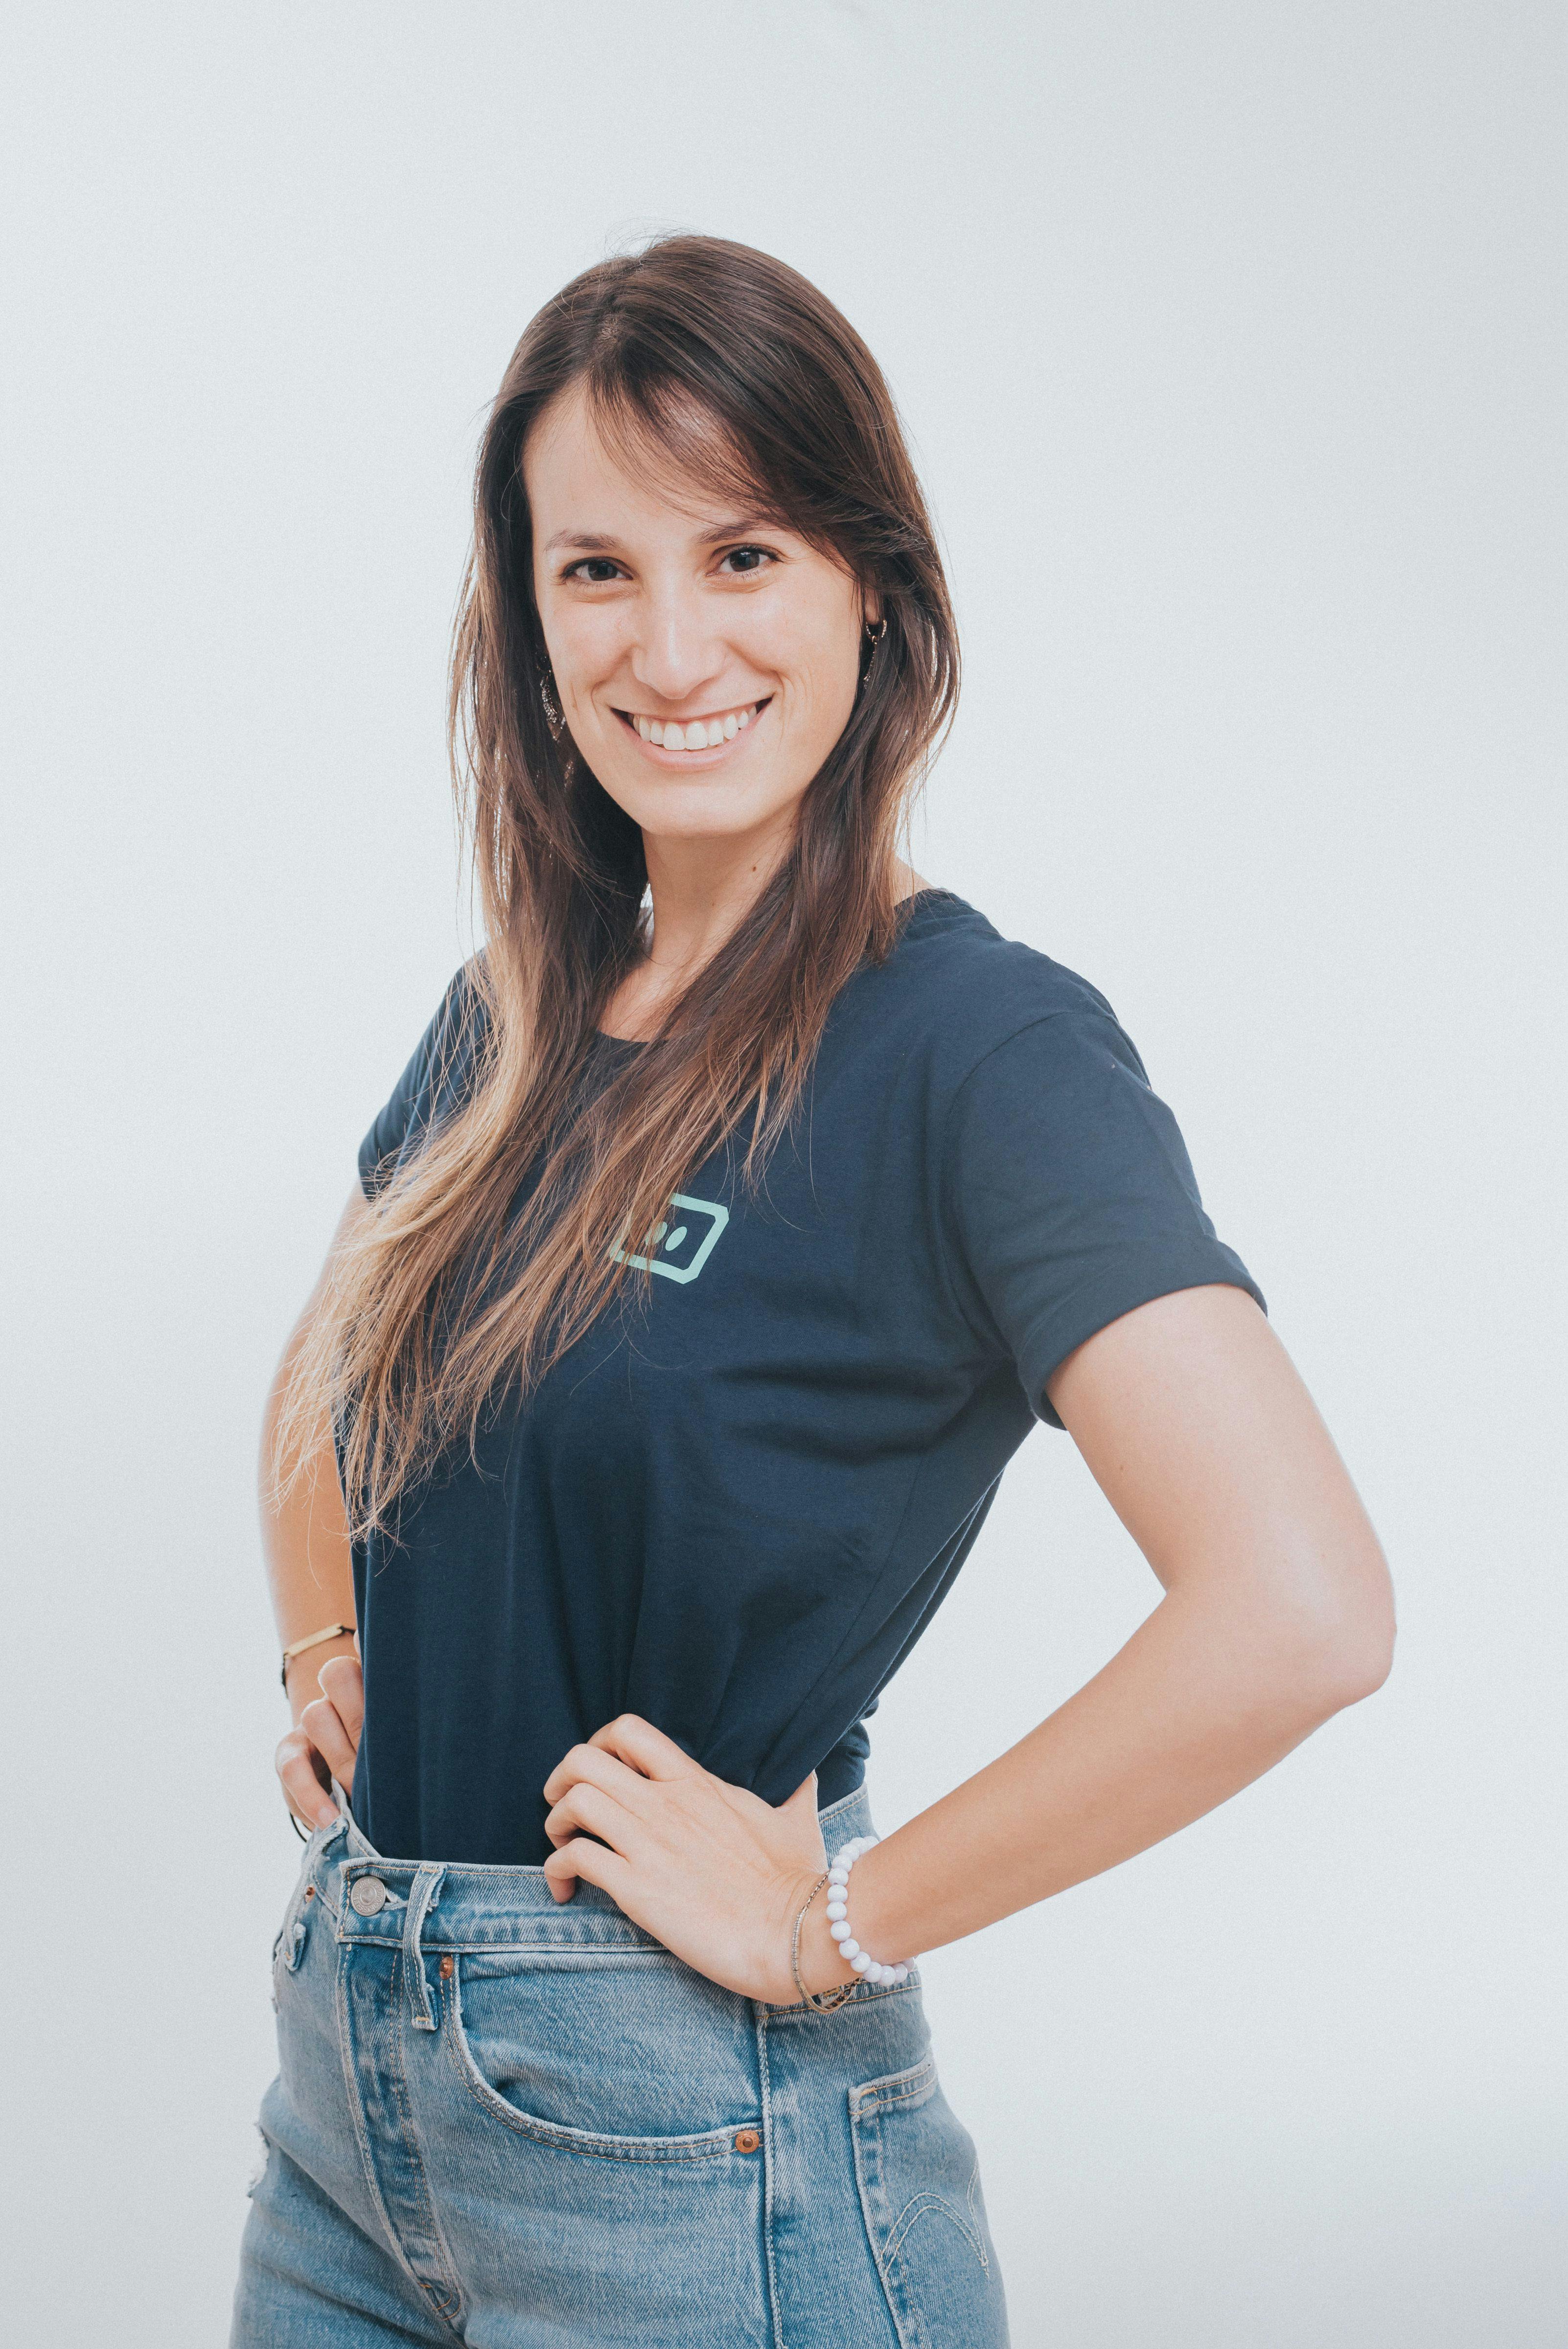 Rona Hirsch  HackerNoon profile picture